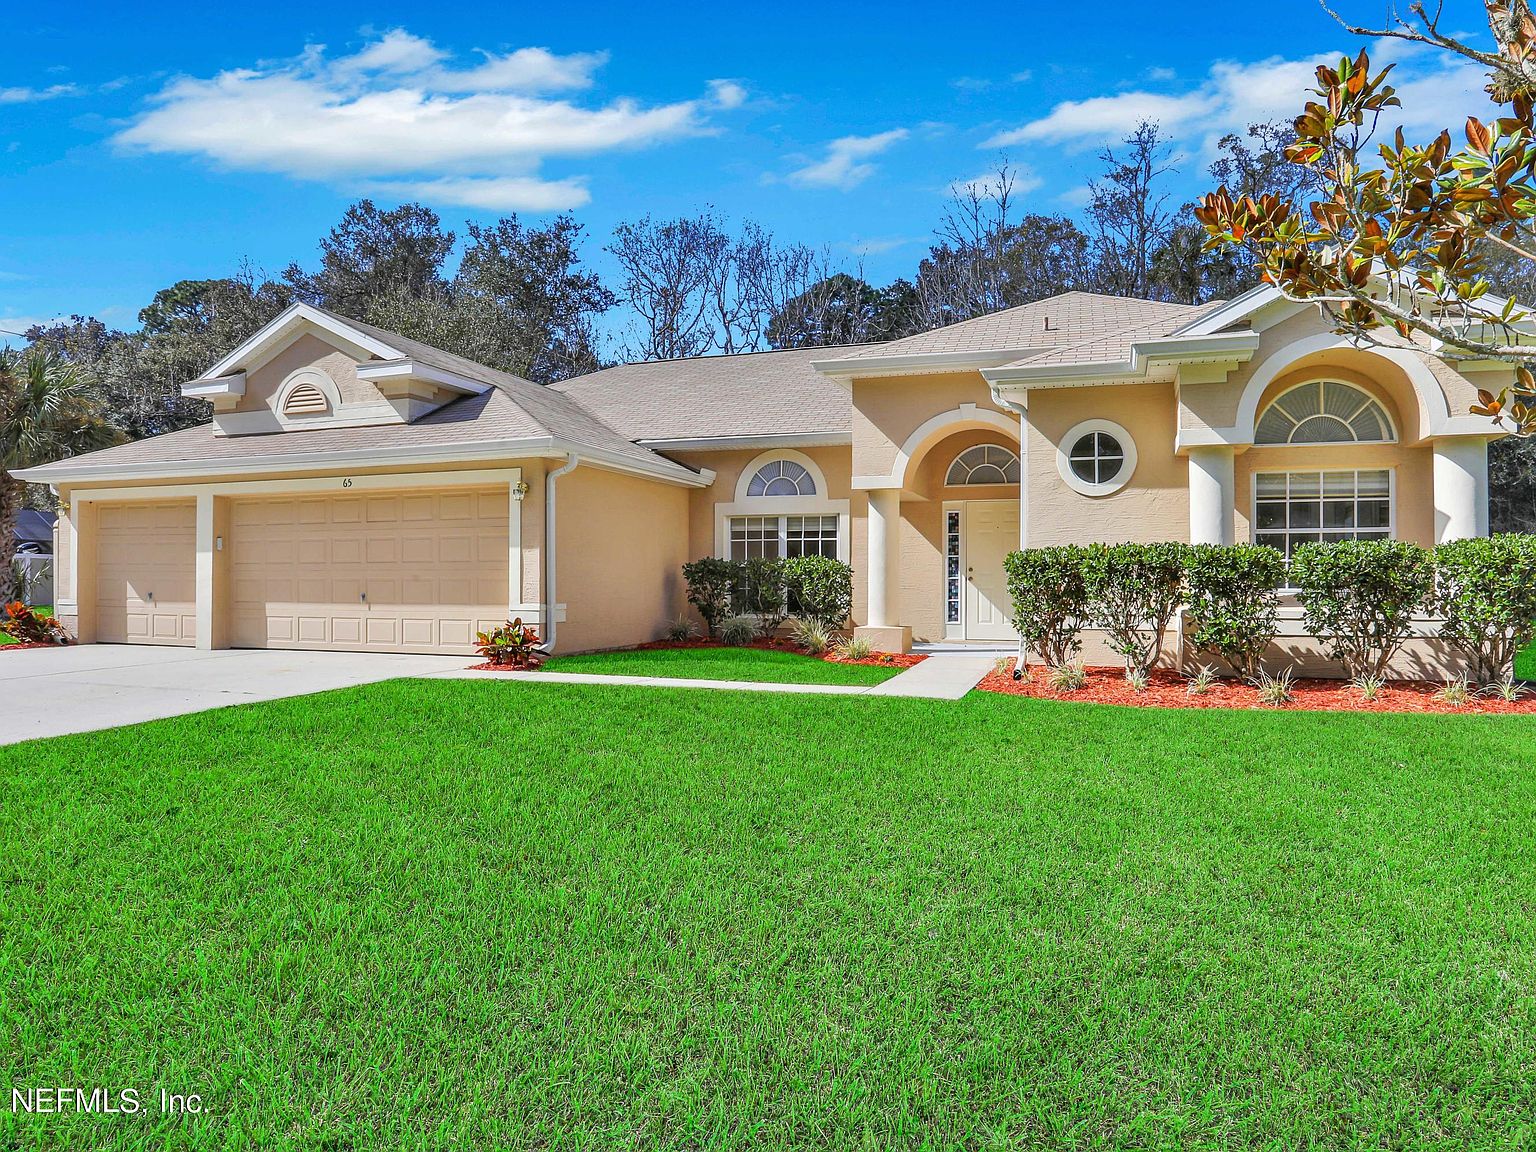 65 Blare Dr Palm Coast Fl 32137 Zillow Free cancellationreserve now, pay when you stay. 65 blare dr palm coast fl 32137 mls 1096175 zillow